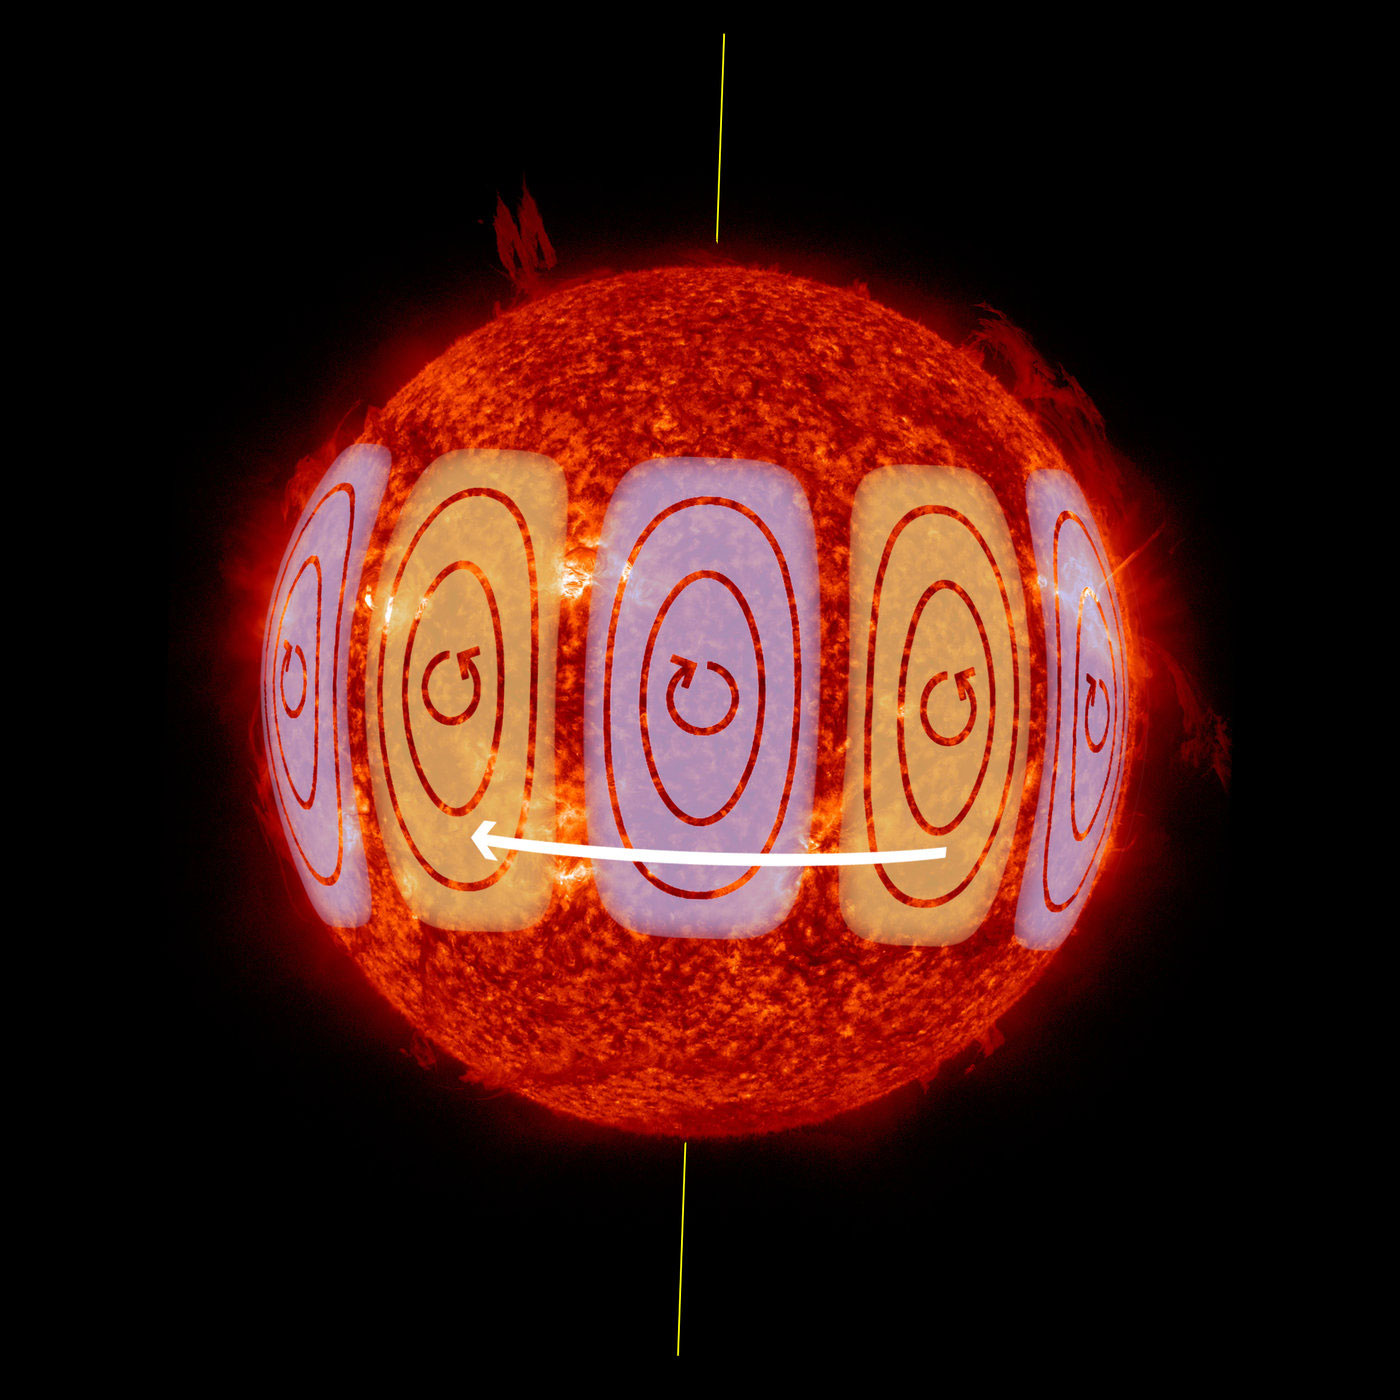 Scientists Discover Gigantic Solar Rossby Waves on the Sun